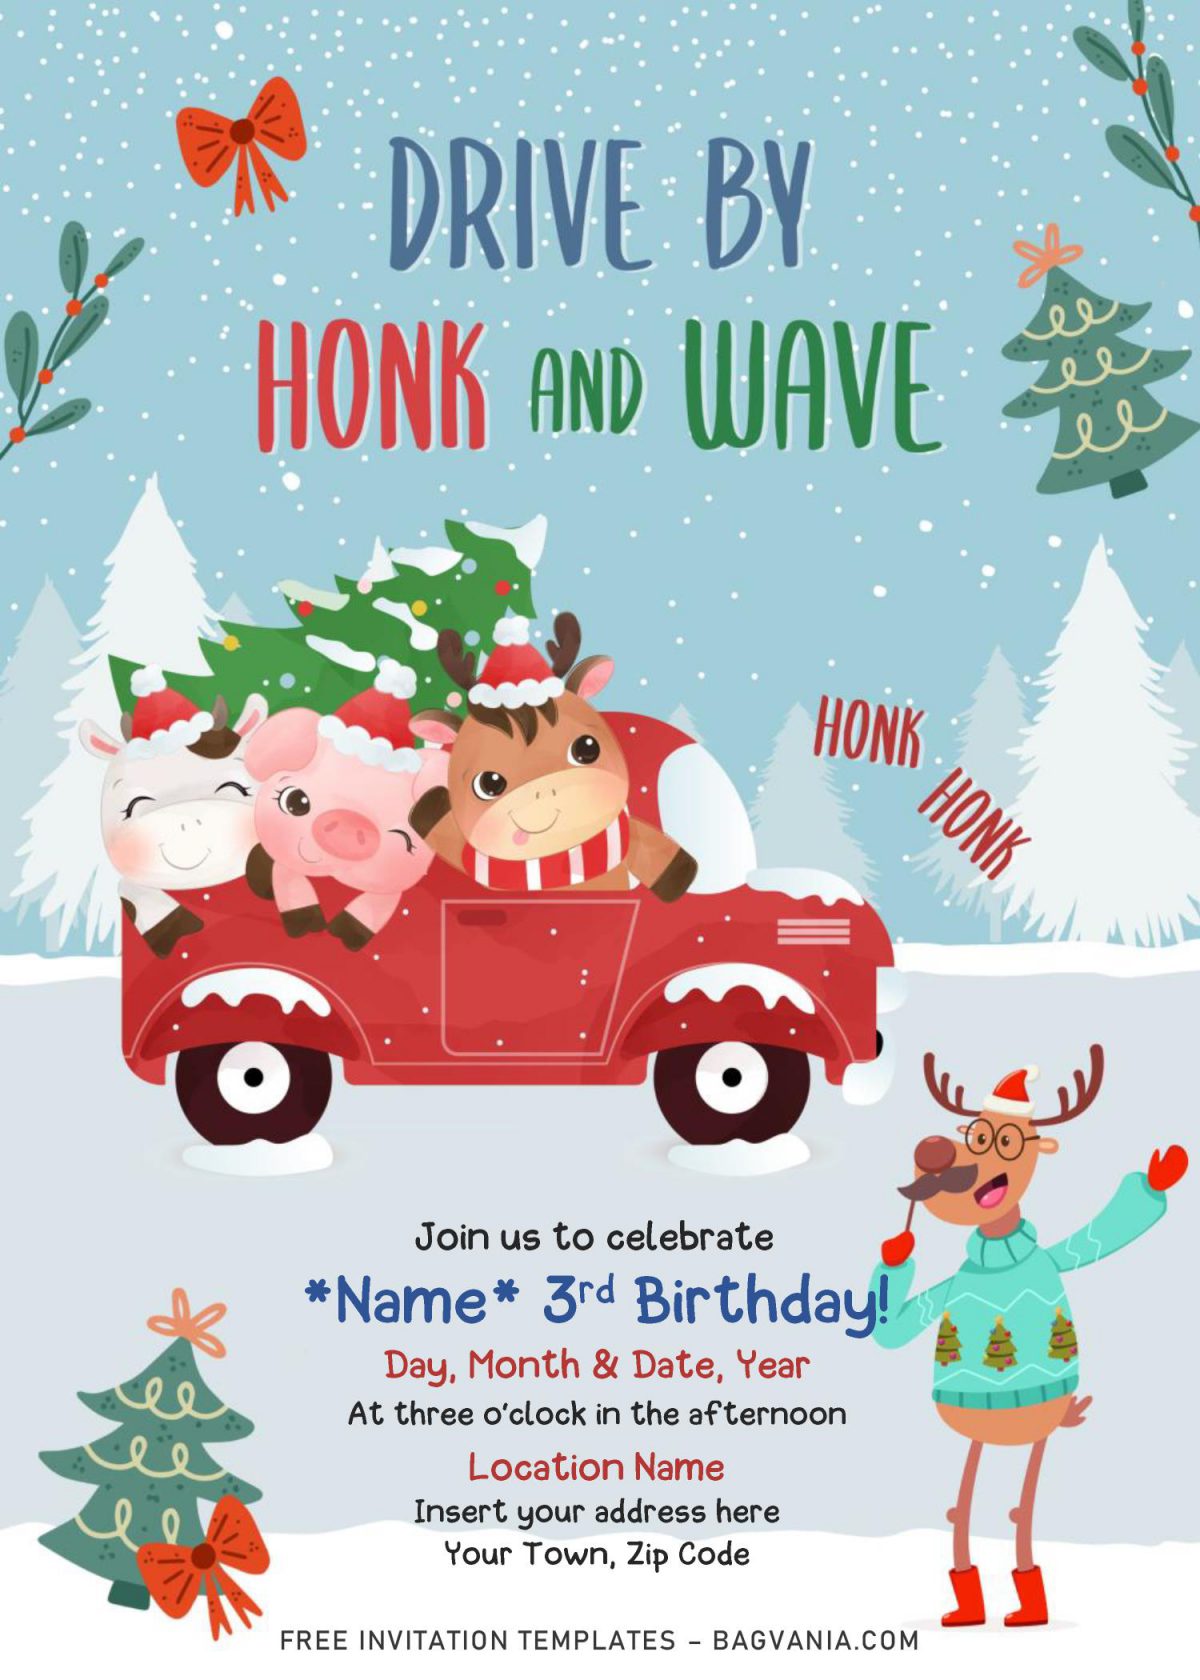 Free Winter Red Truck Drive By Birthday Party Invitation Templates For Word and has portrait orientation card design